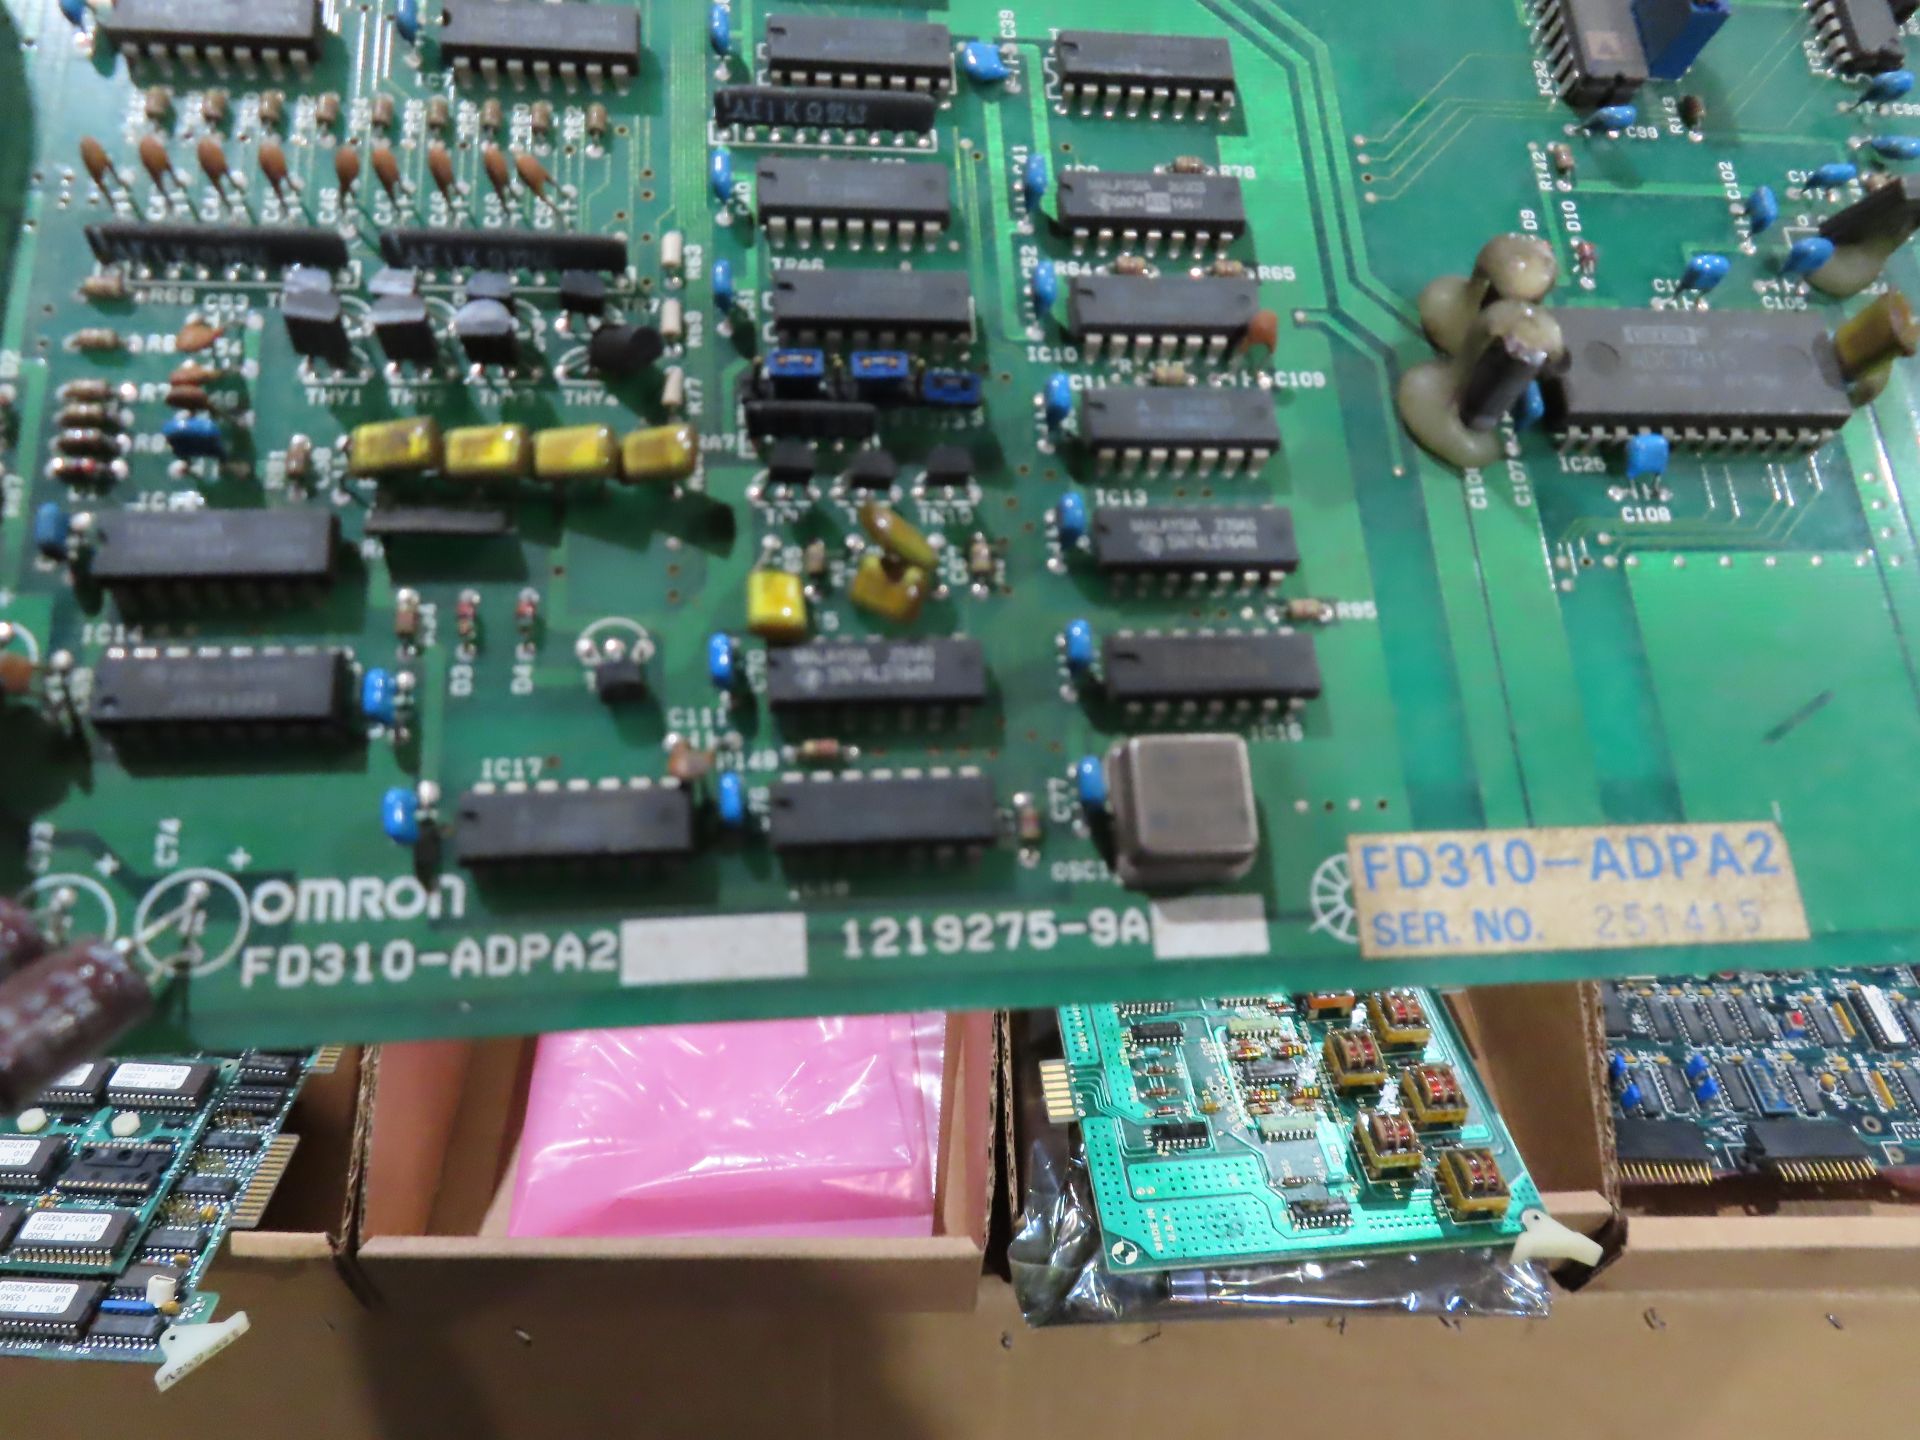 Omron FD310-ADPA2 servo controller interface, as always, with Brolyn LLC auctions, all lots can be - Image 2 of 2